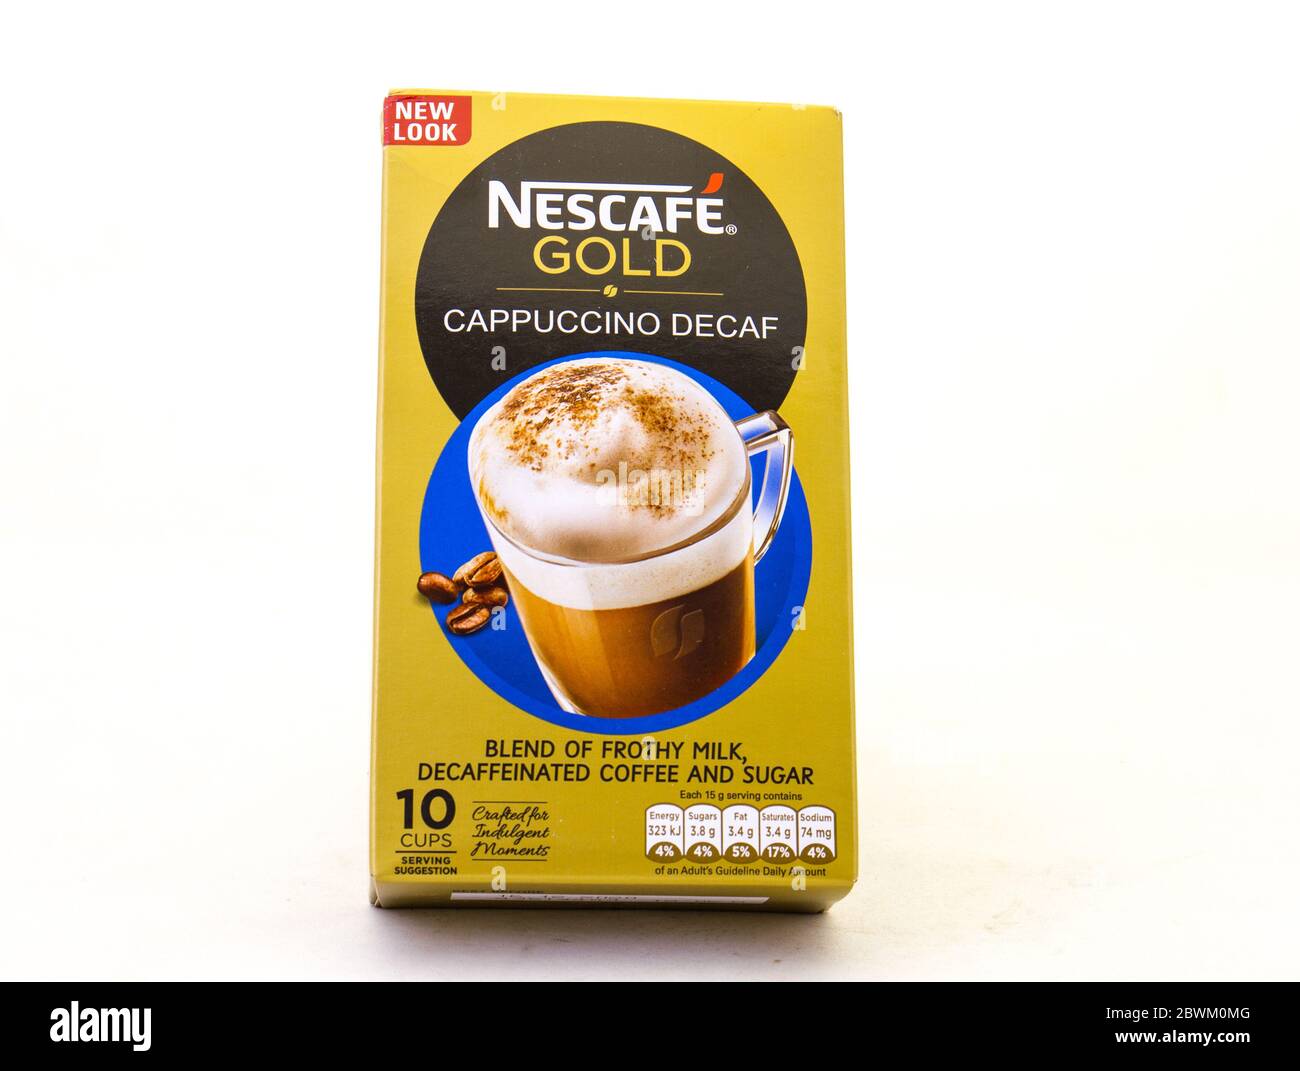 https://c8.alamy.com/comp/2BWM0MG/alberton-south-africa-a-box-of-nescafe-gold-cappuccino-sachets-isolated-on-a-clear-background-image-with-copy-space-in-horizontal-format-2BWM0MG.jpg